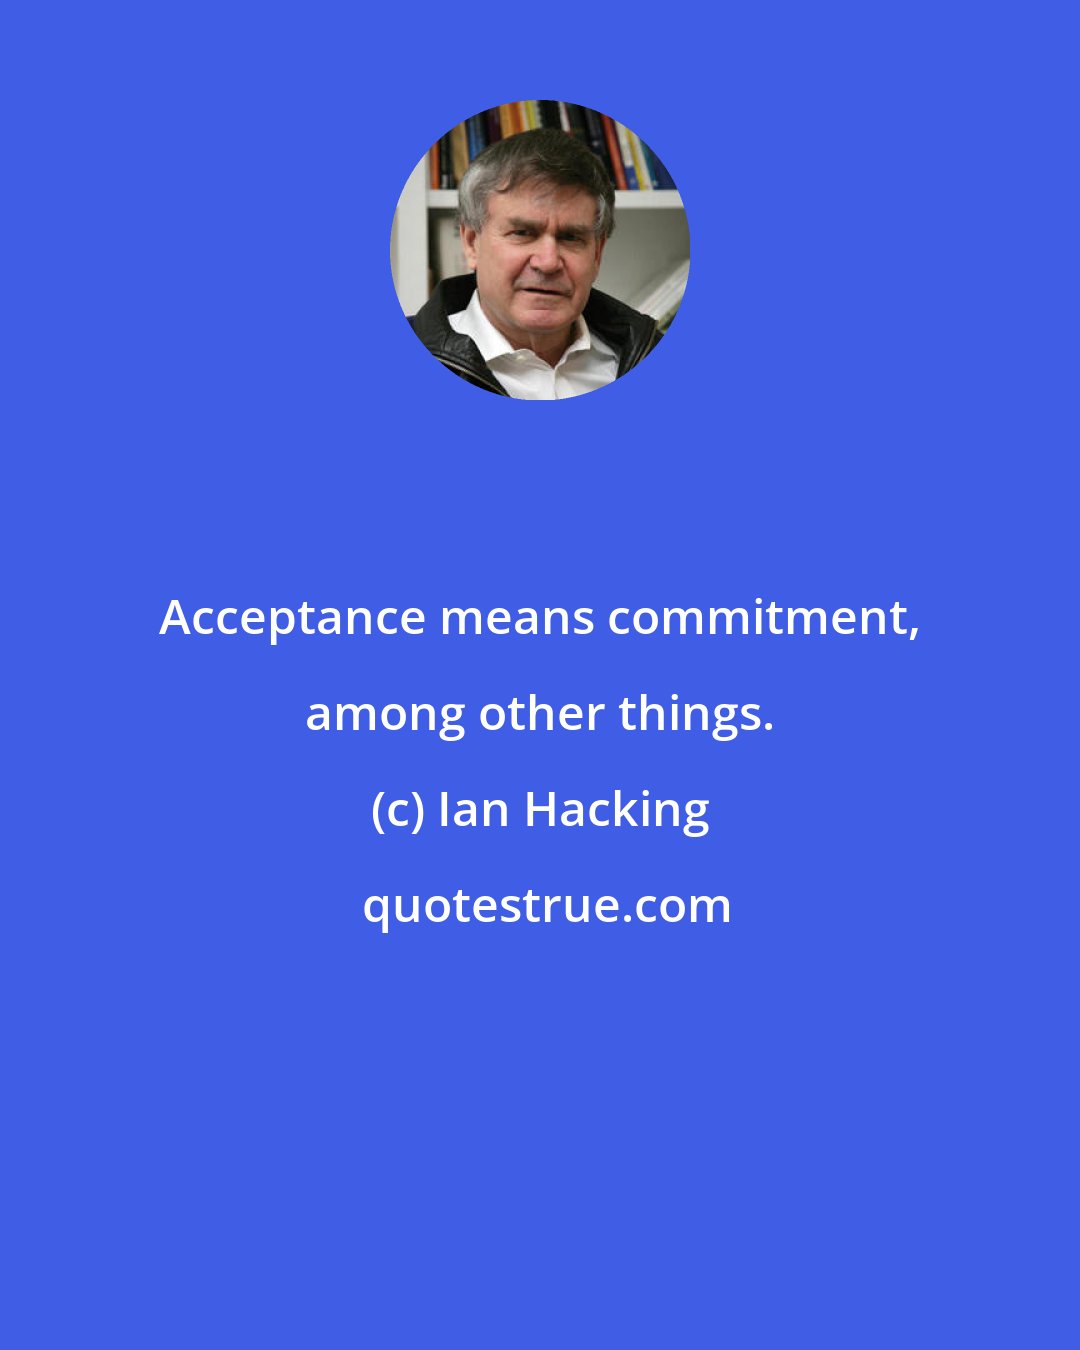 Ian Hacking: Acceptance means commitment, among other things.